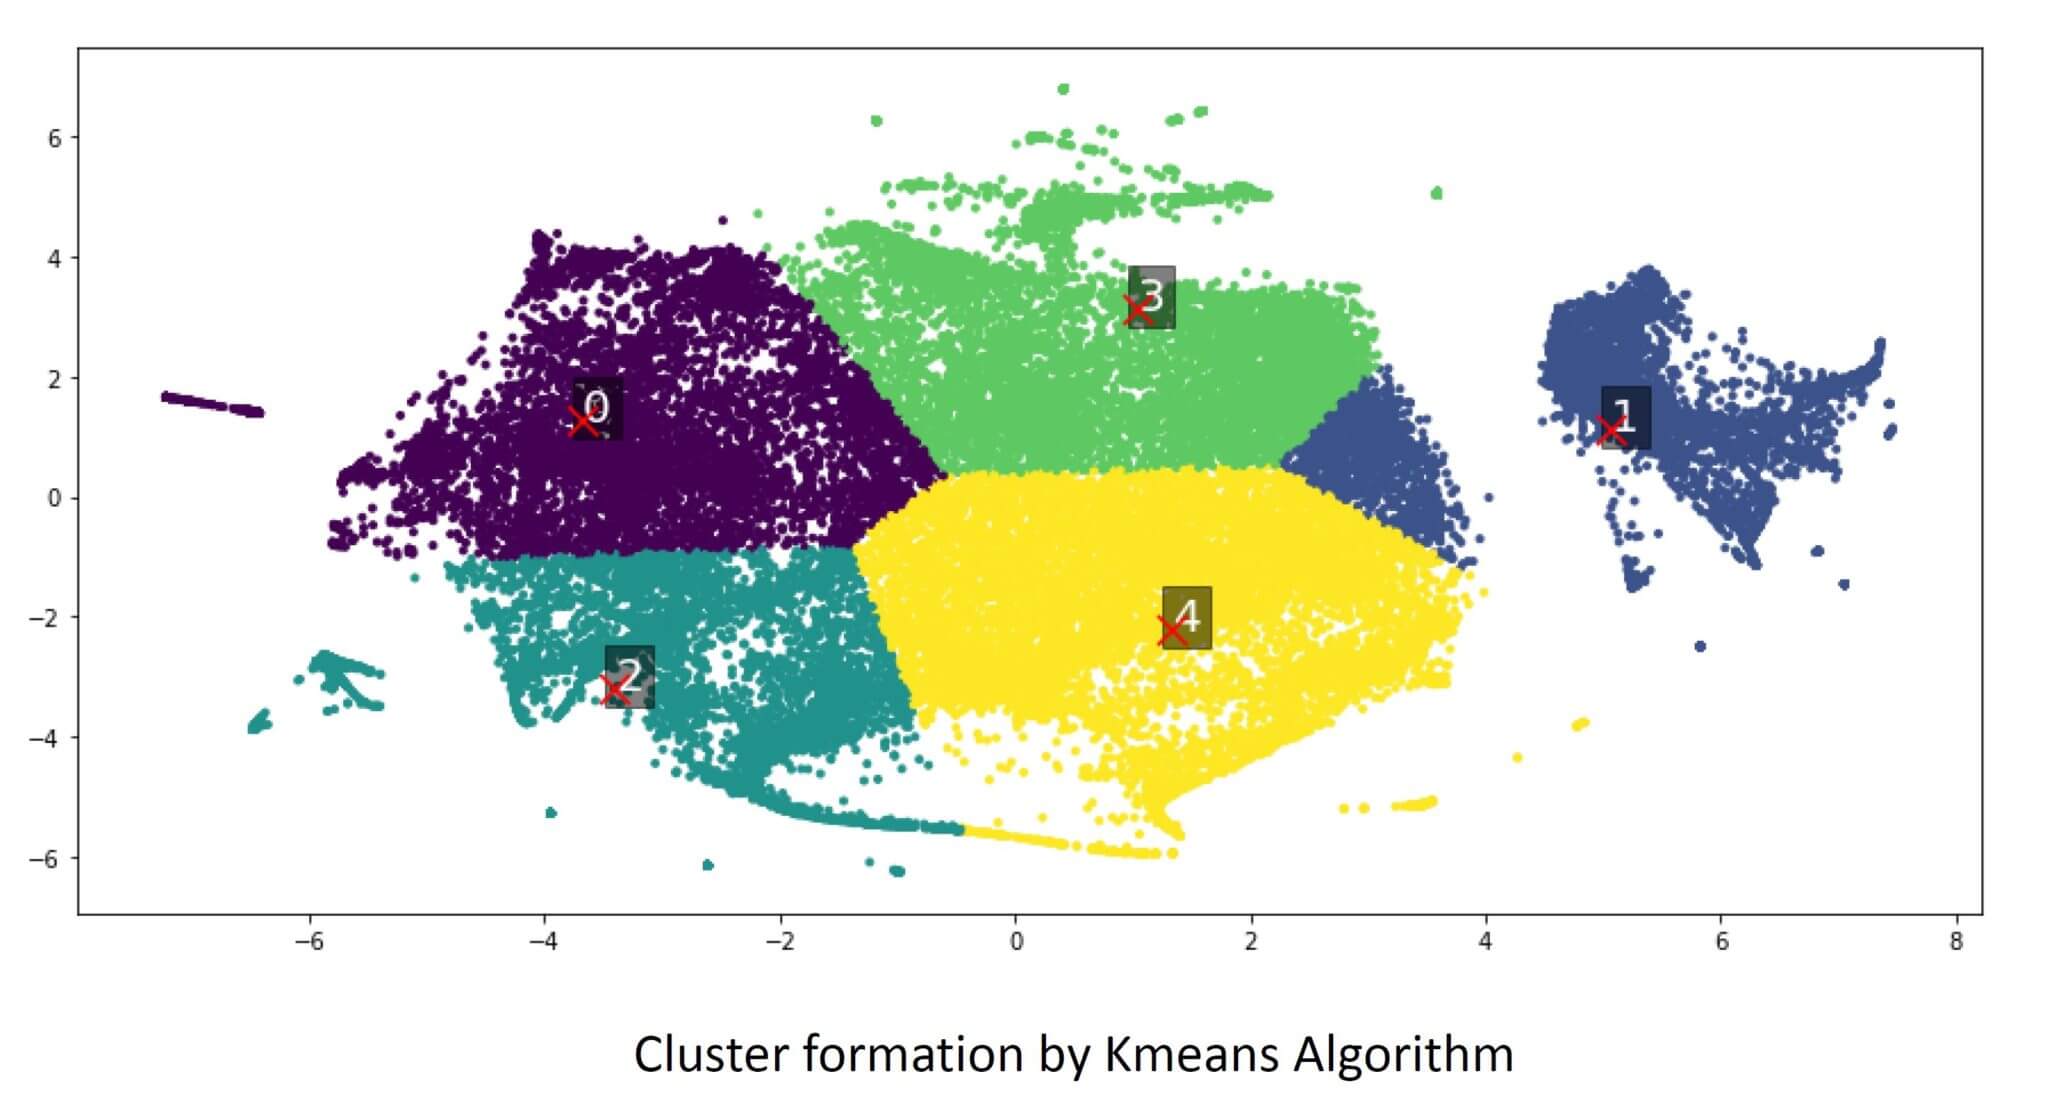 Unsupervised Learning - Online News Popularity Data Clustering